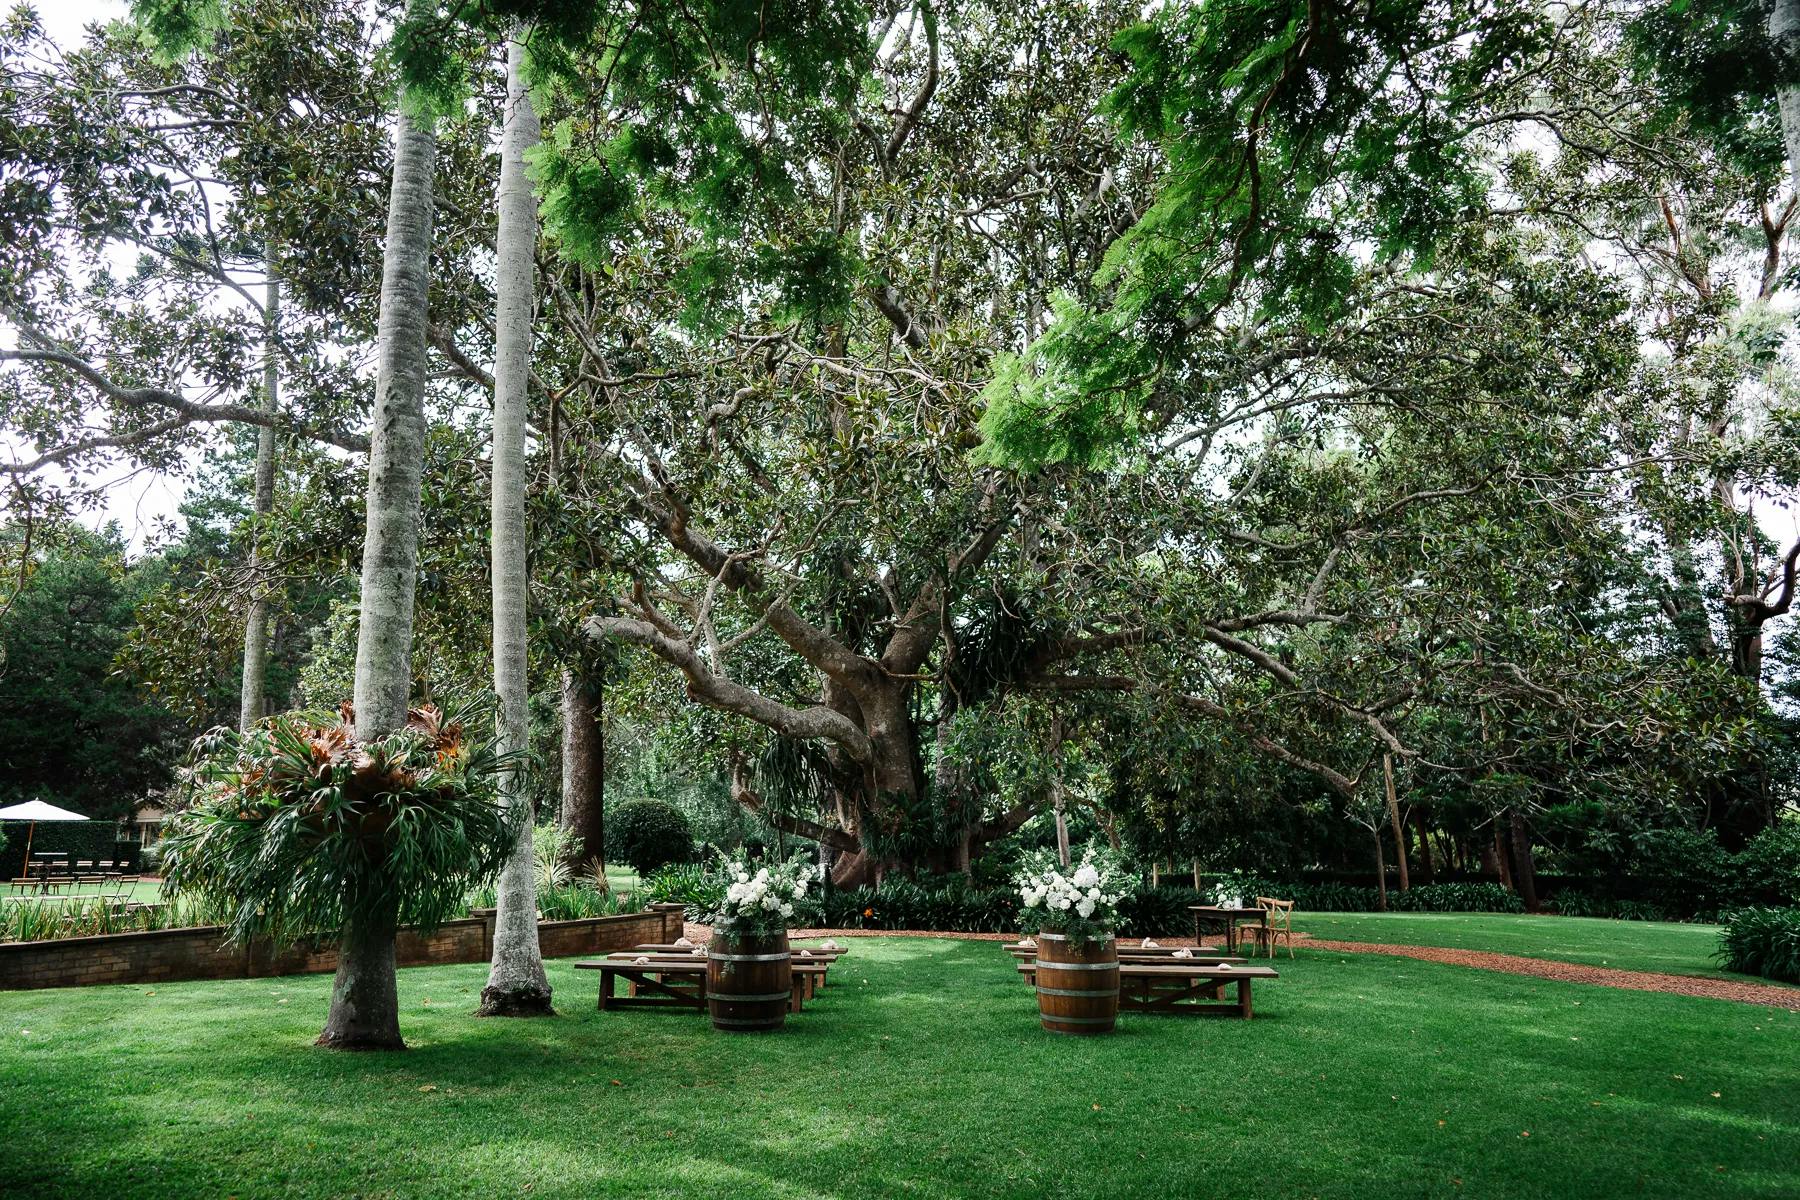 A picturesque outdoor setting featuring a large, spreading tree with abundant green foliage providing shade over several wooden benches and tables. The grass is lush and green, and decorative flower arrangements sit atop barrels, enhancing the serene atmosphere.